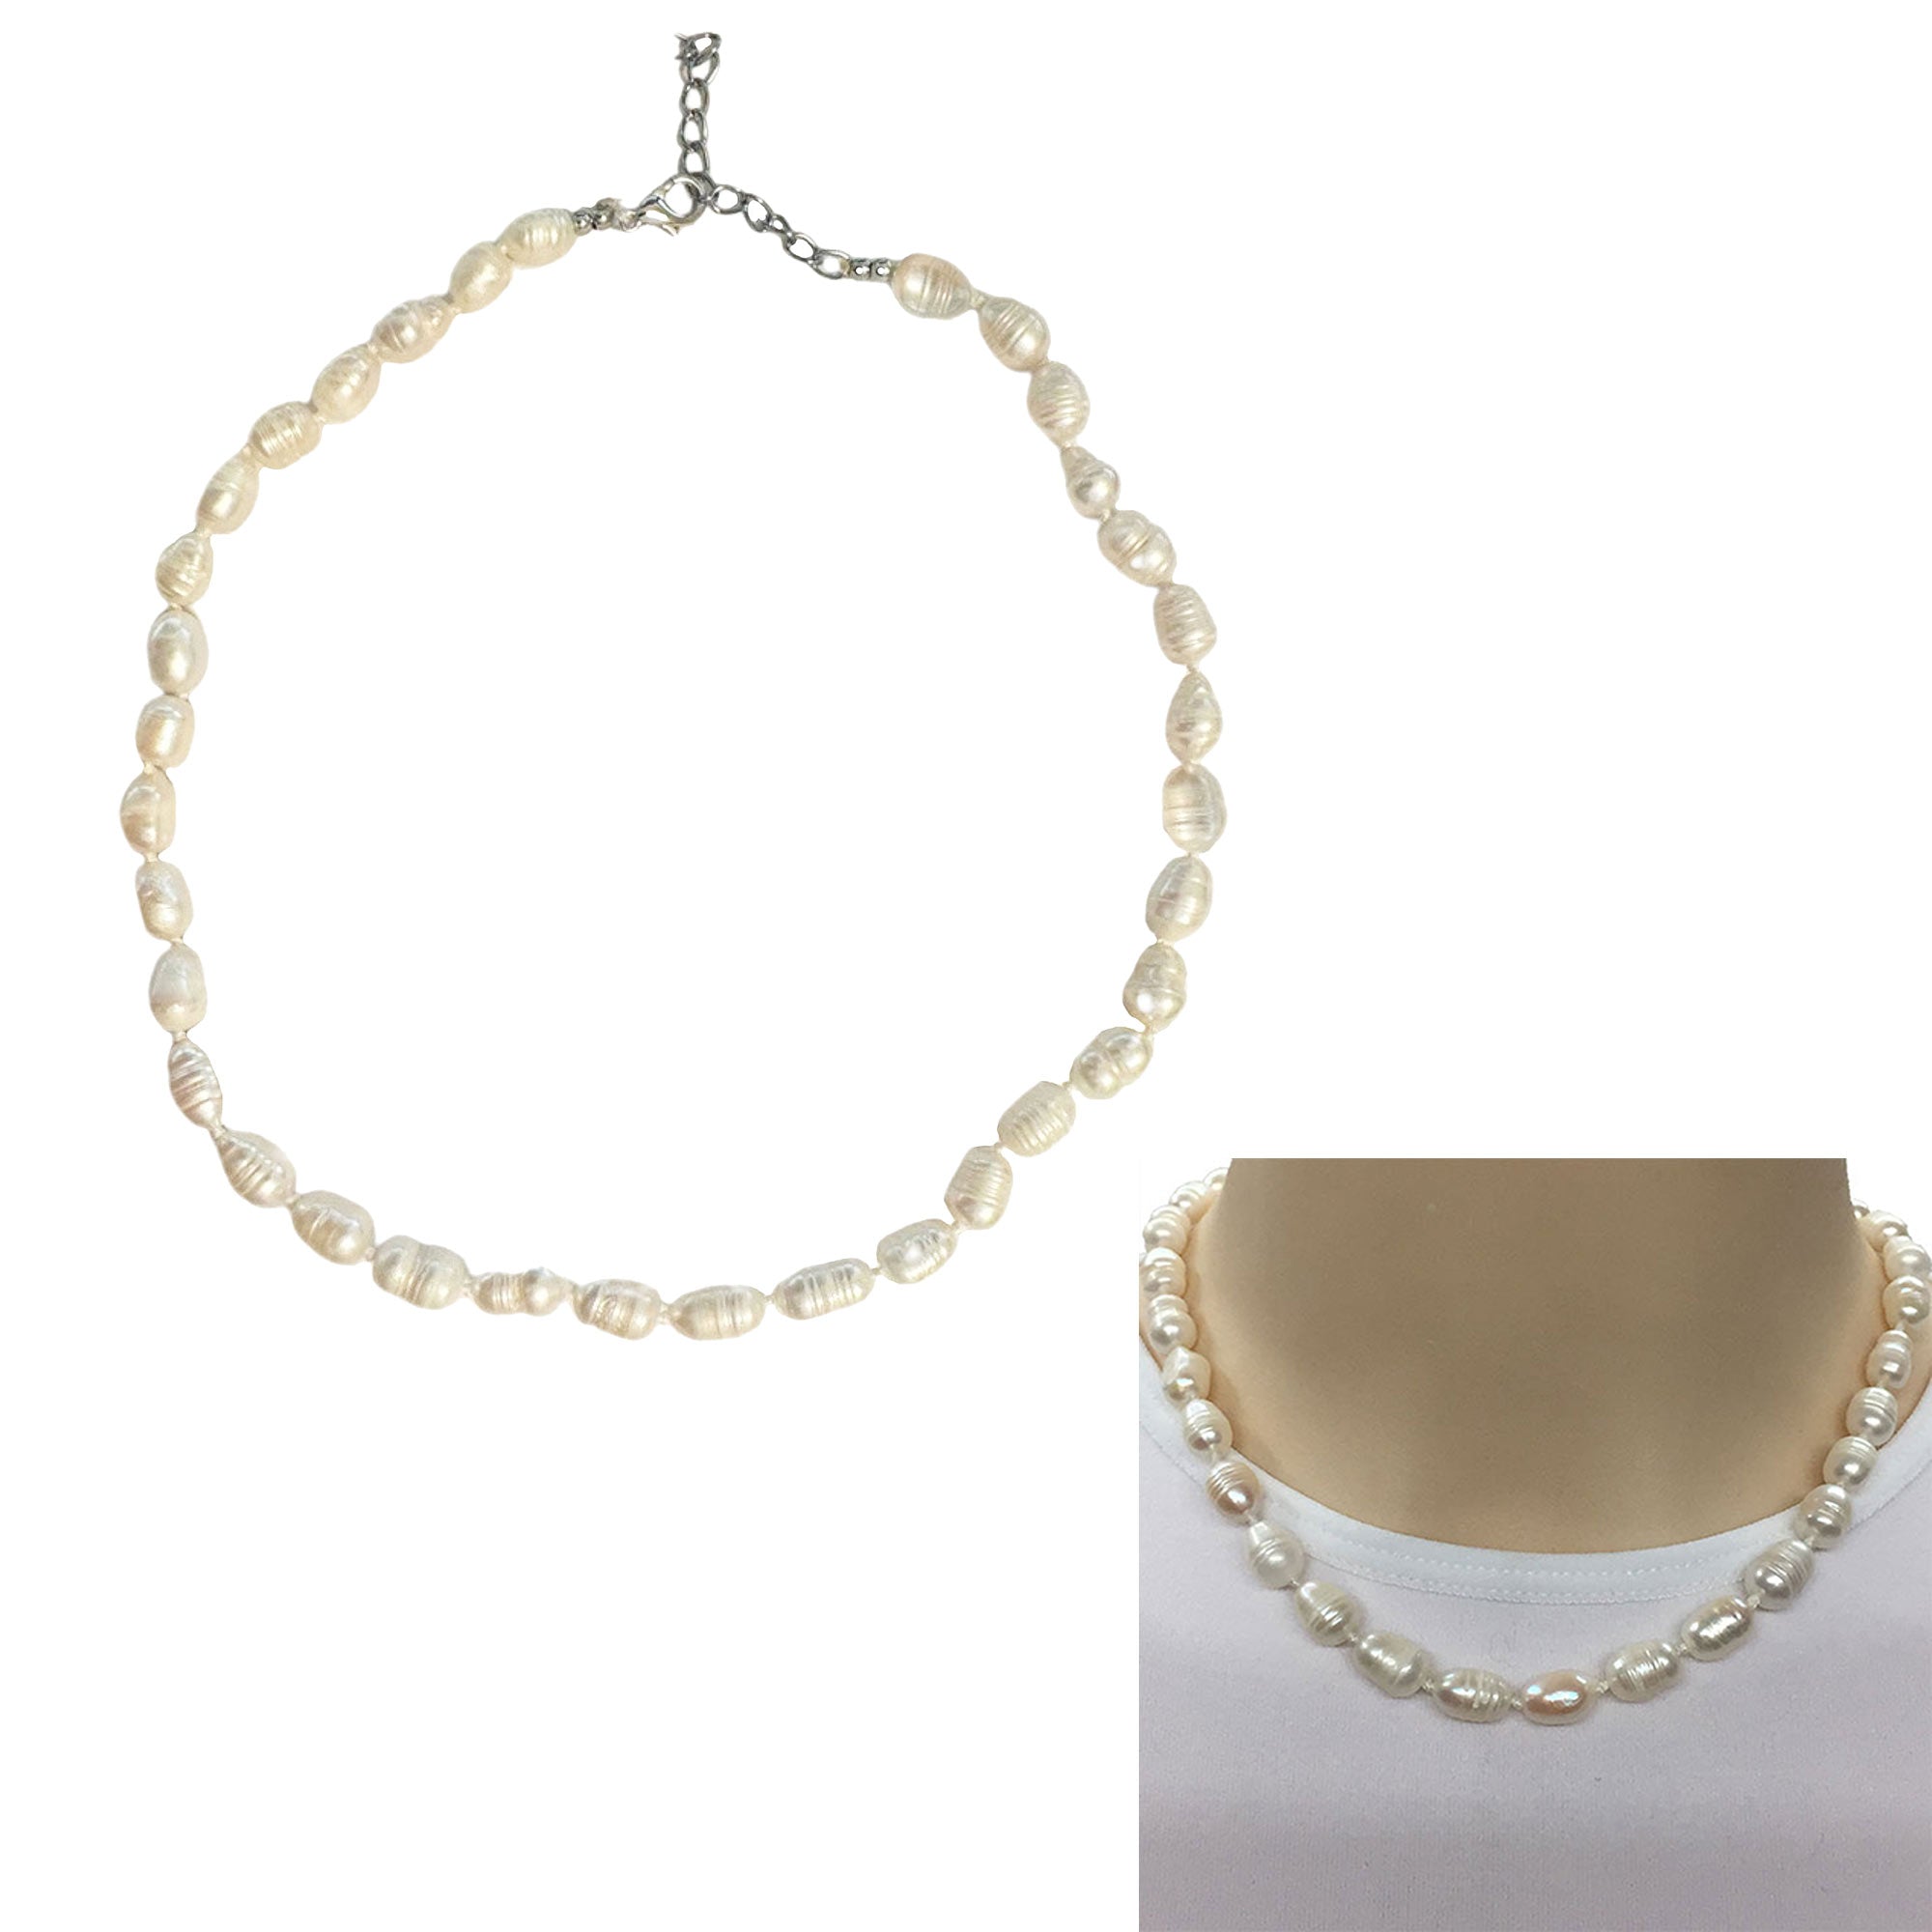 CLEARANCE PEARL NECKLACE (CASE OF 60 - $1.25 / PIECE)  Wholesale Pearl Necklace SKU: 70900-60